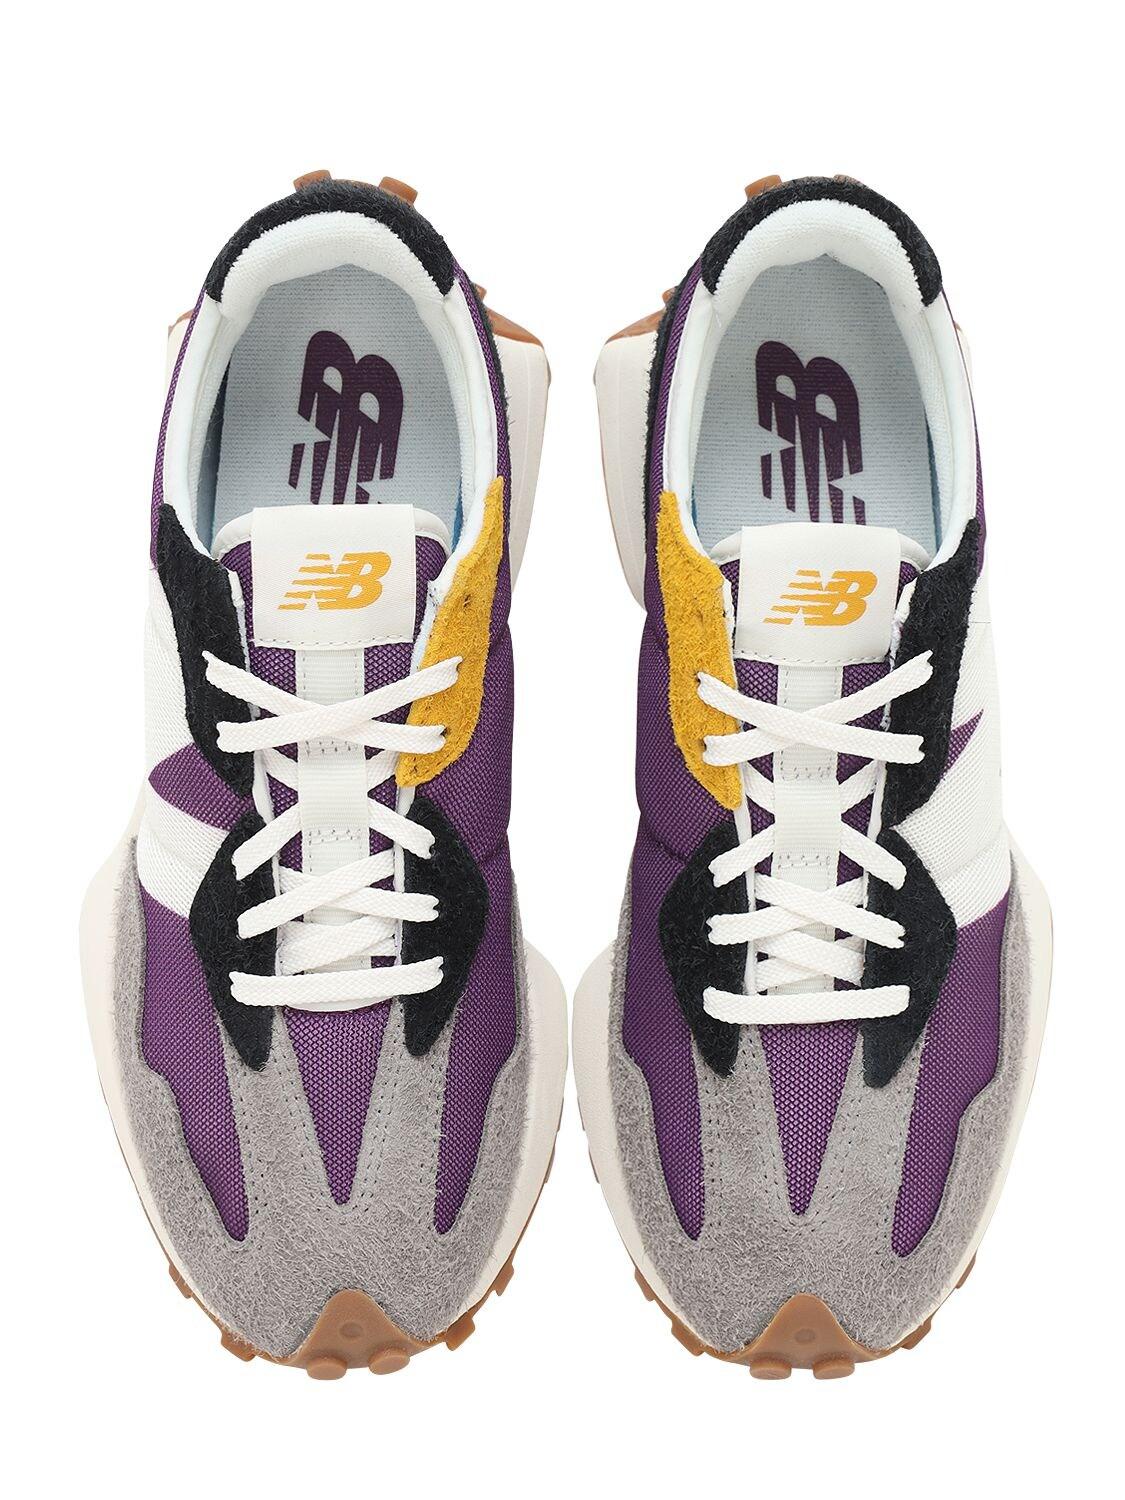 New Balance Synthetic 327 Nylon And Mesh Retro Sneakers in Purple ...